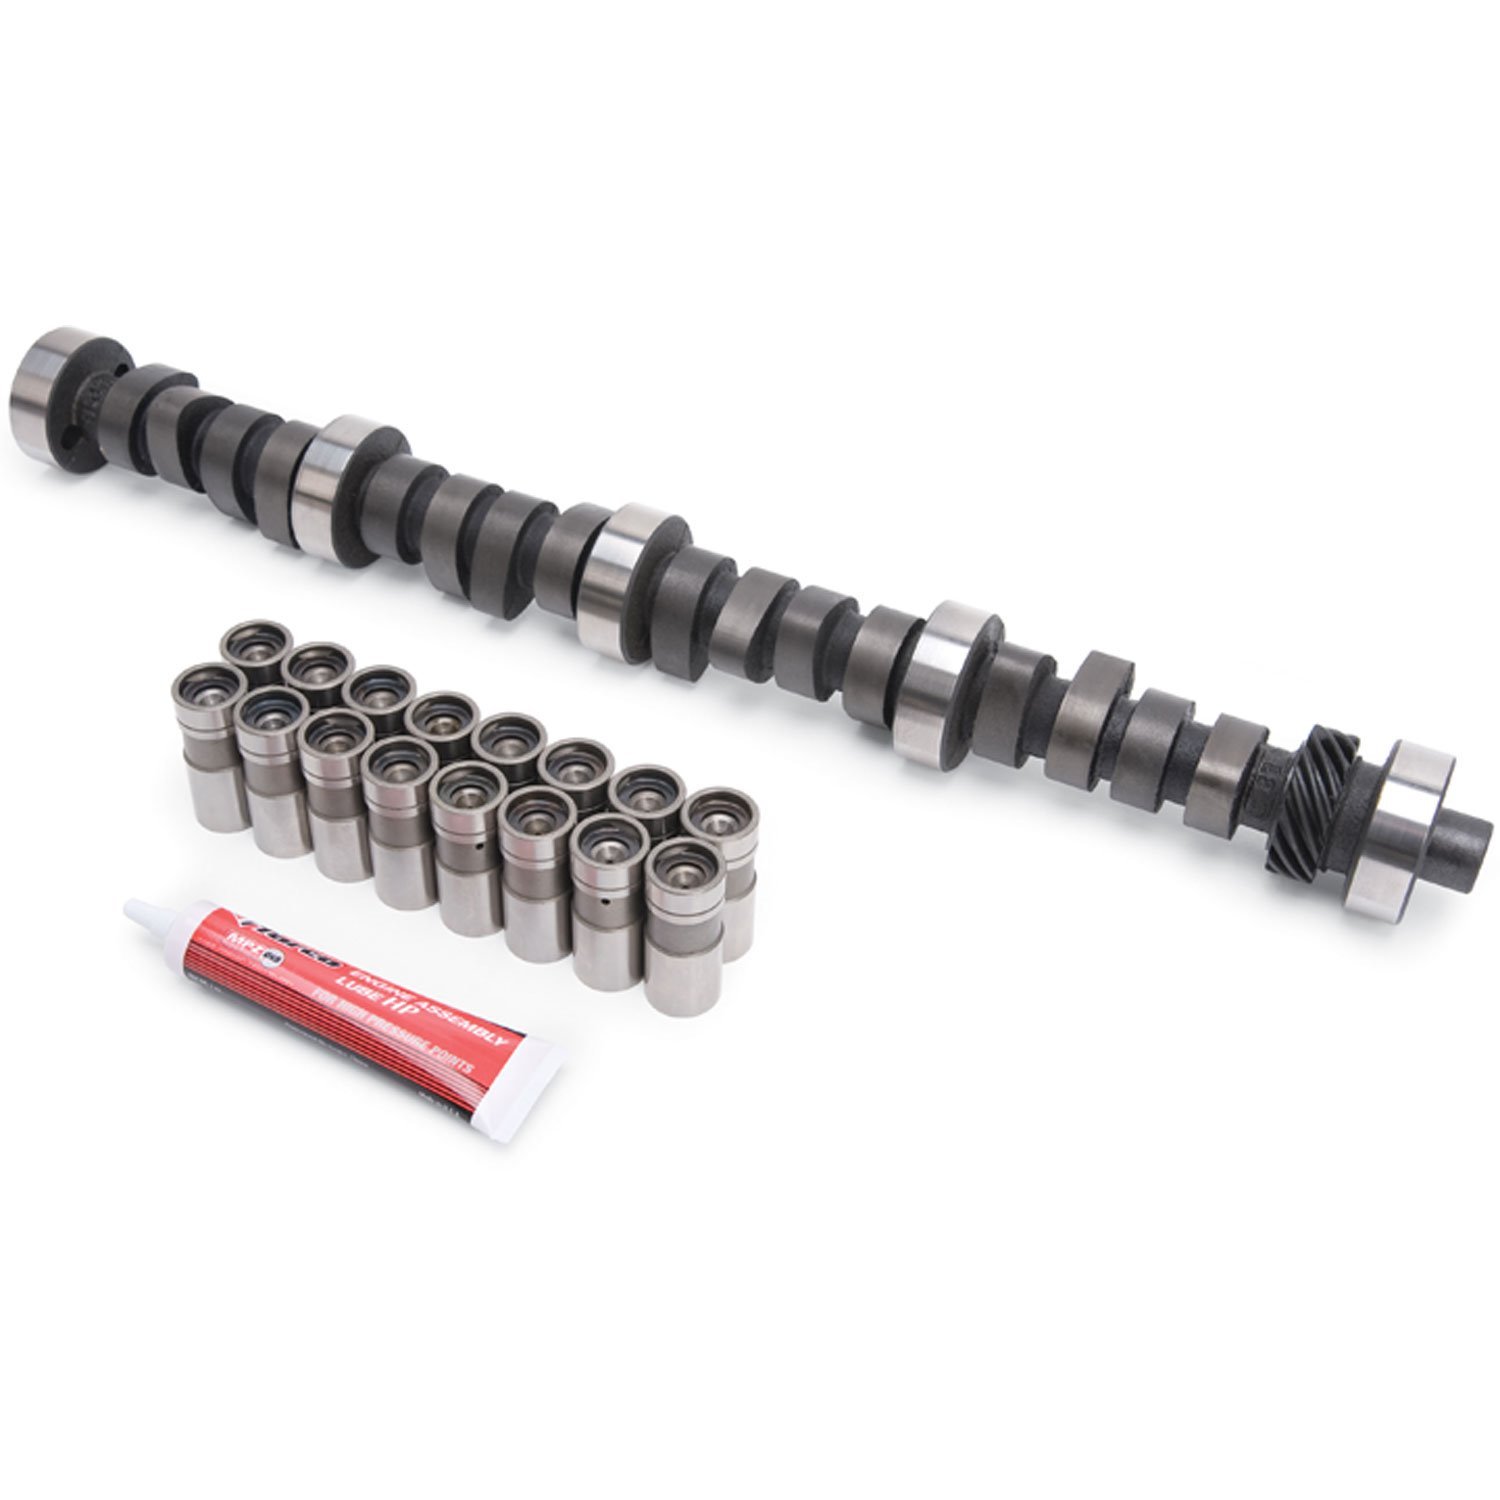 Torker-Plus Camshaft & Lifter Kit for Small Block Ford 289-302ci